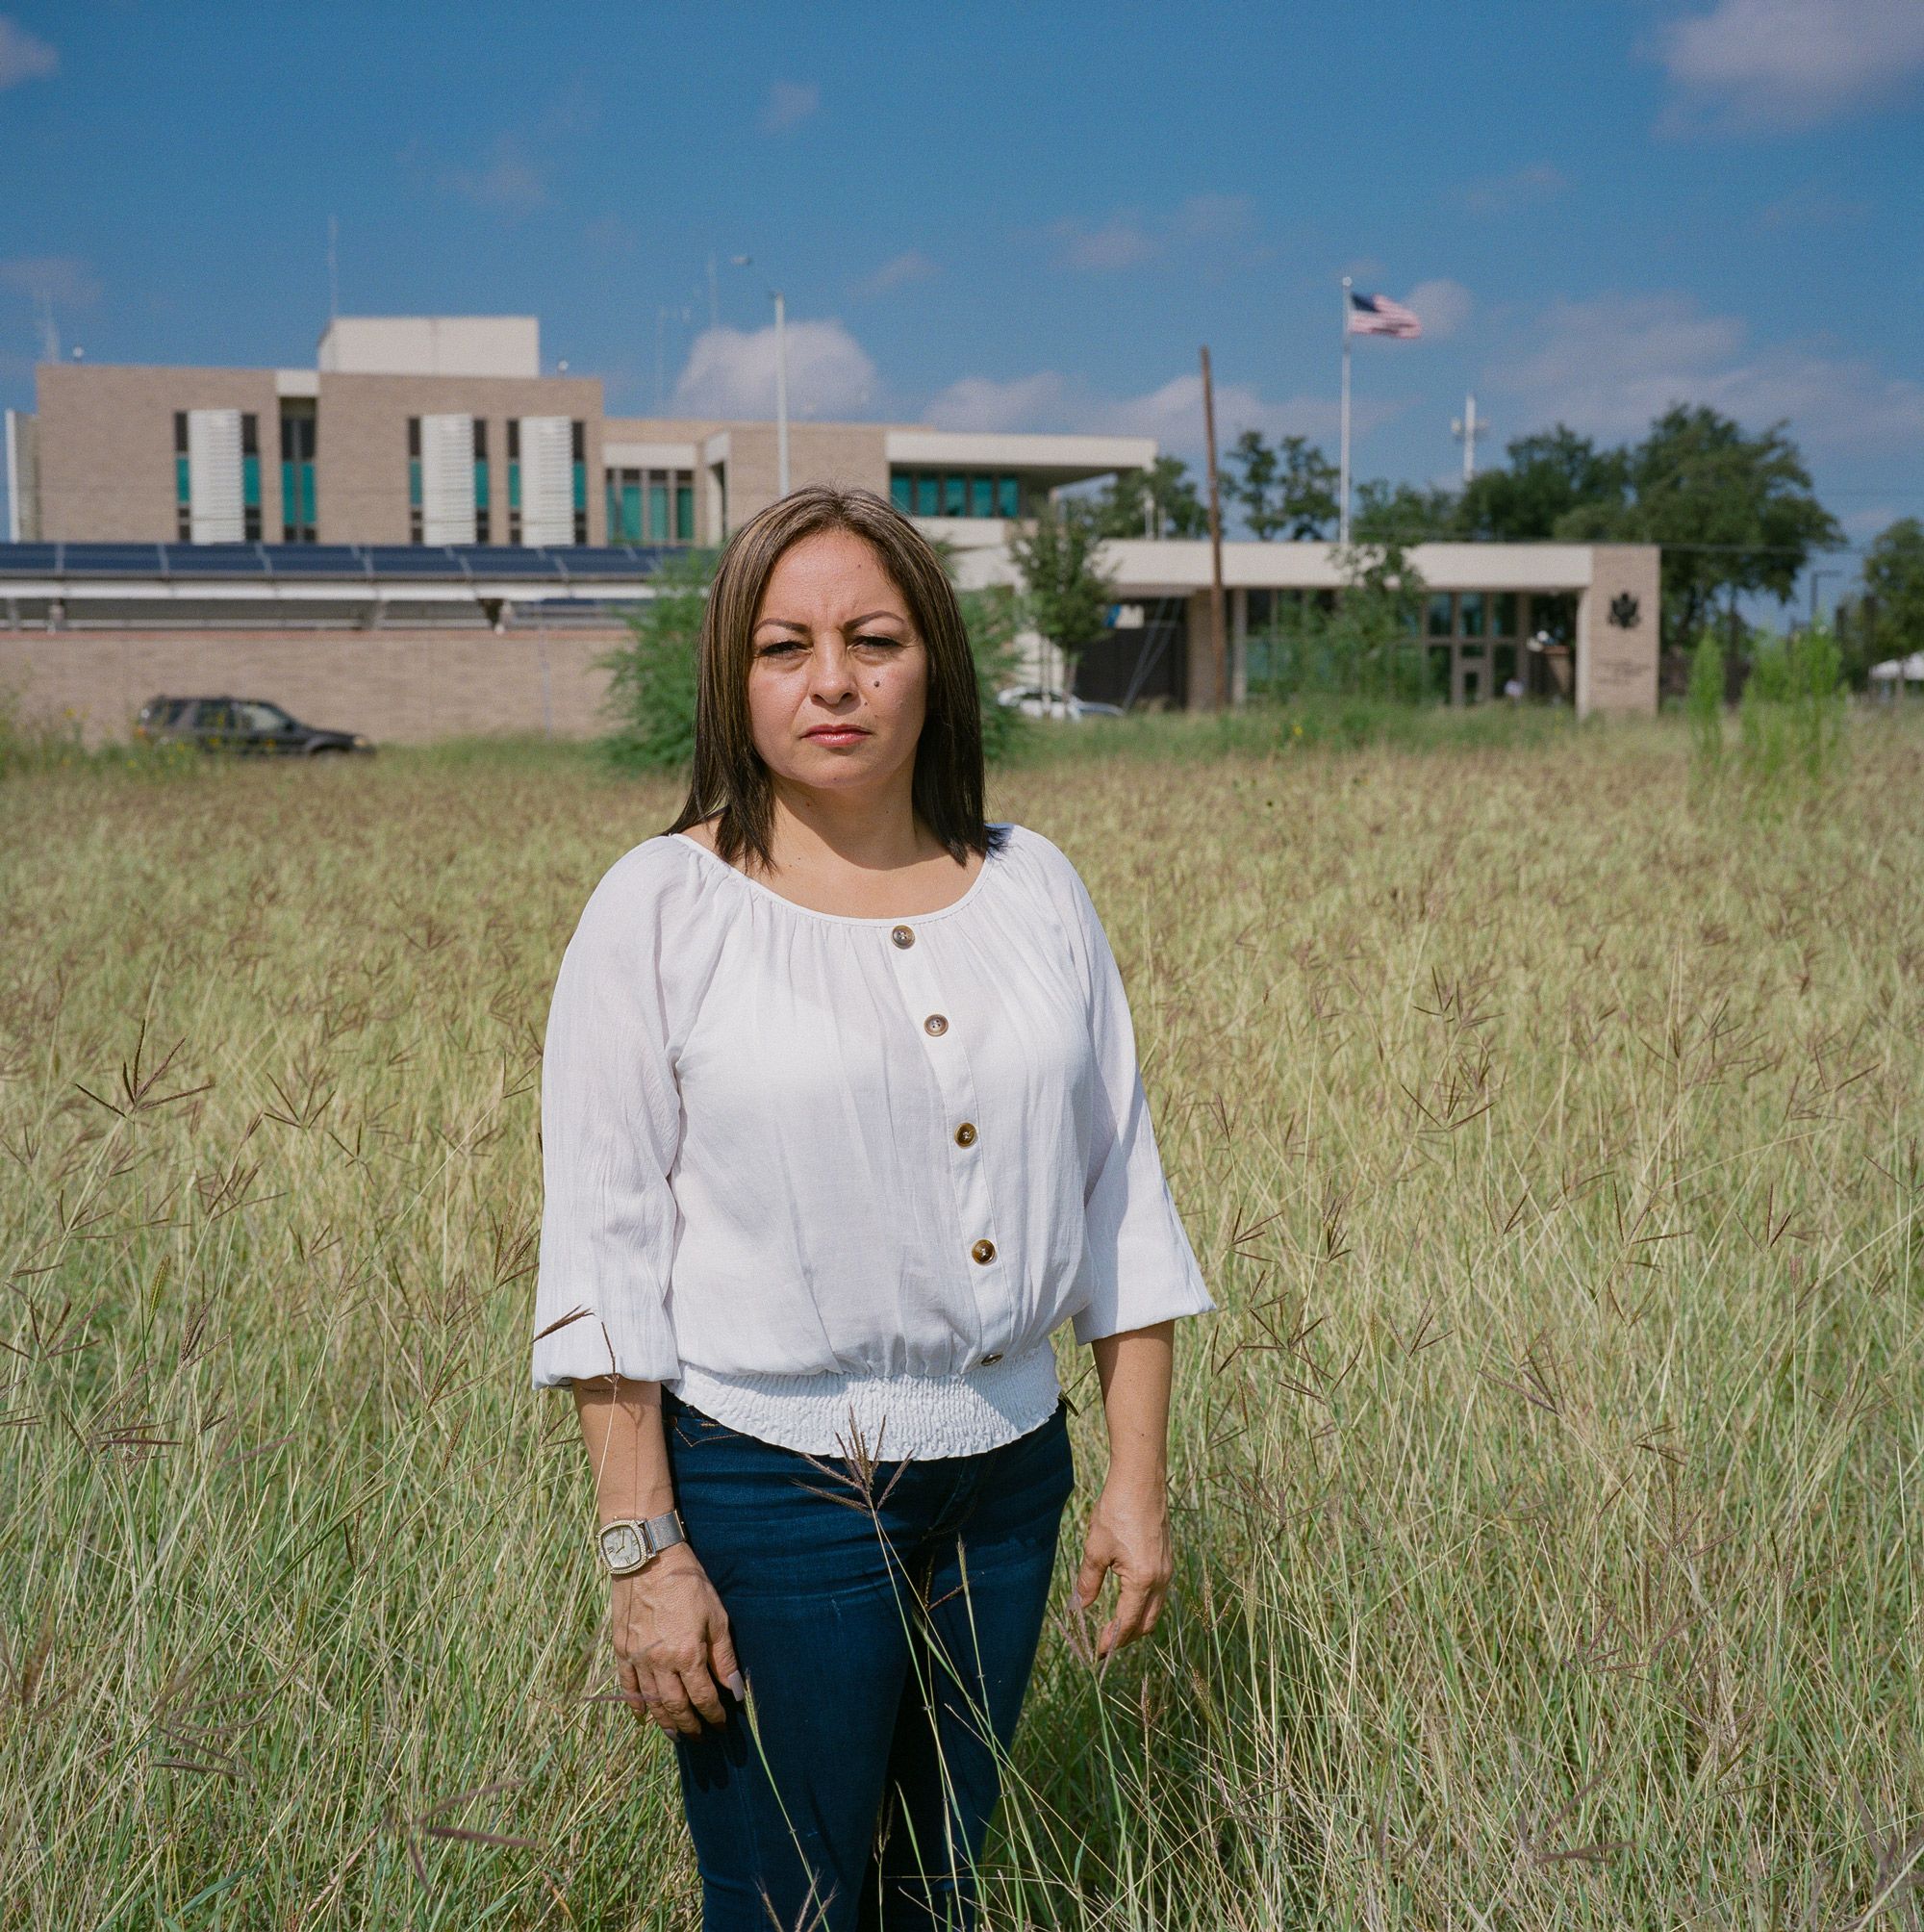 Maria Elena Dominguez in front of the United States Consulate in Nuevo Laredo, Mexico. Image by by Christopher Lee. Mexico, 2020.